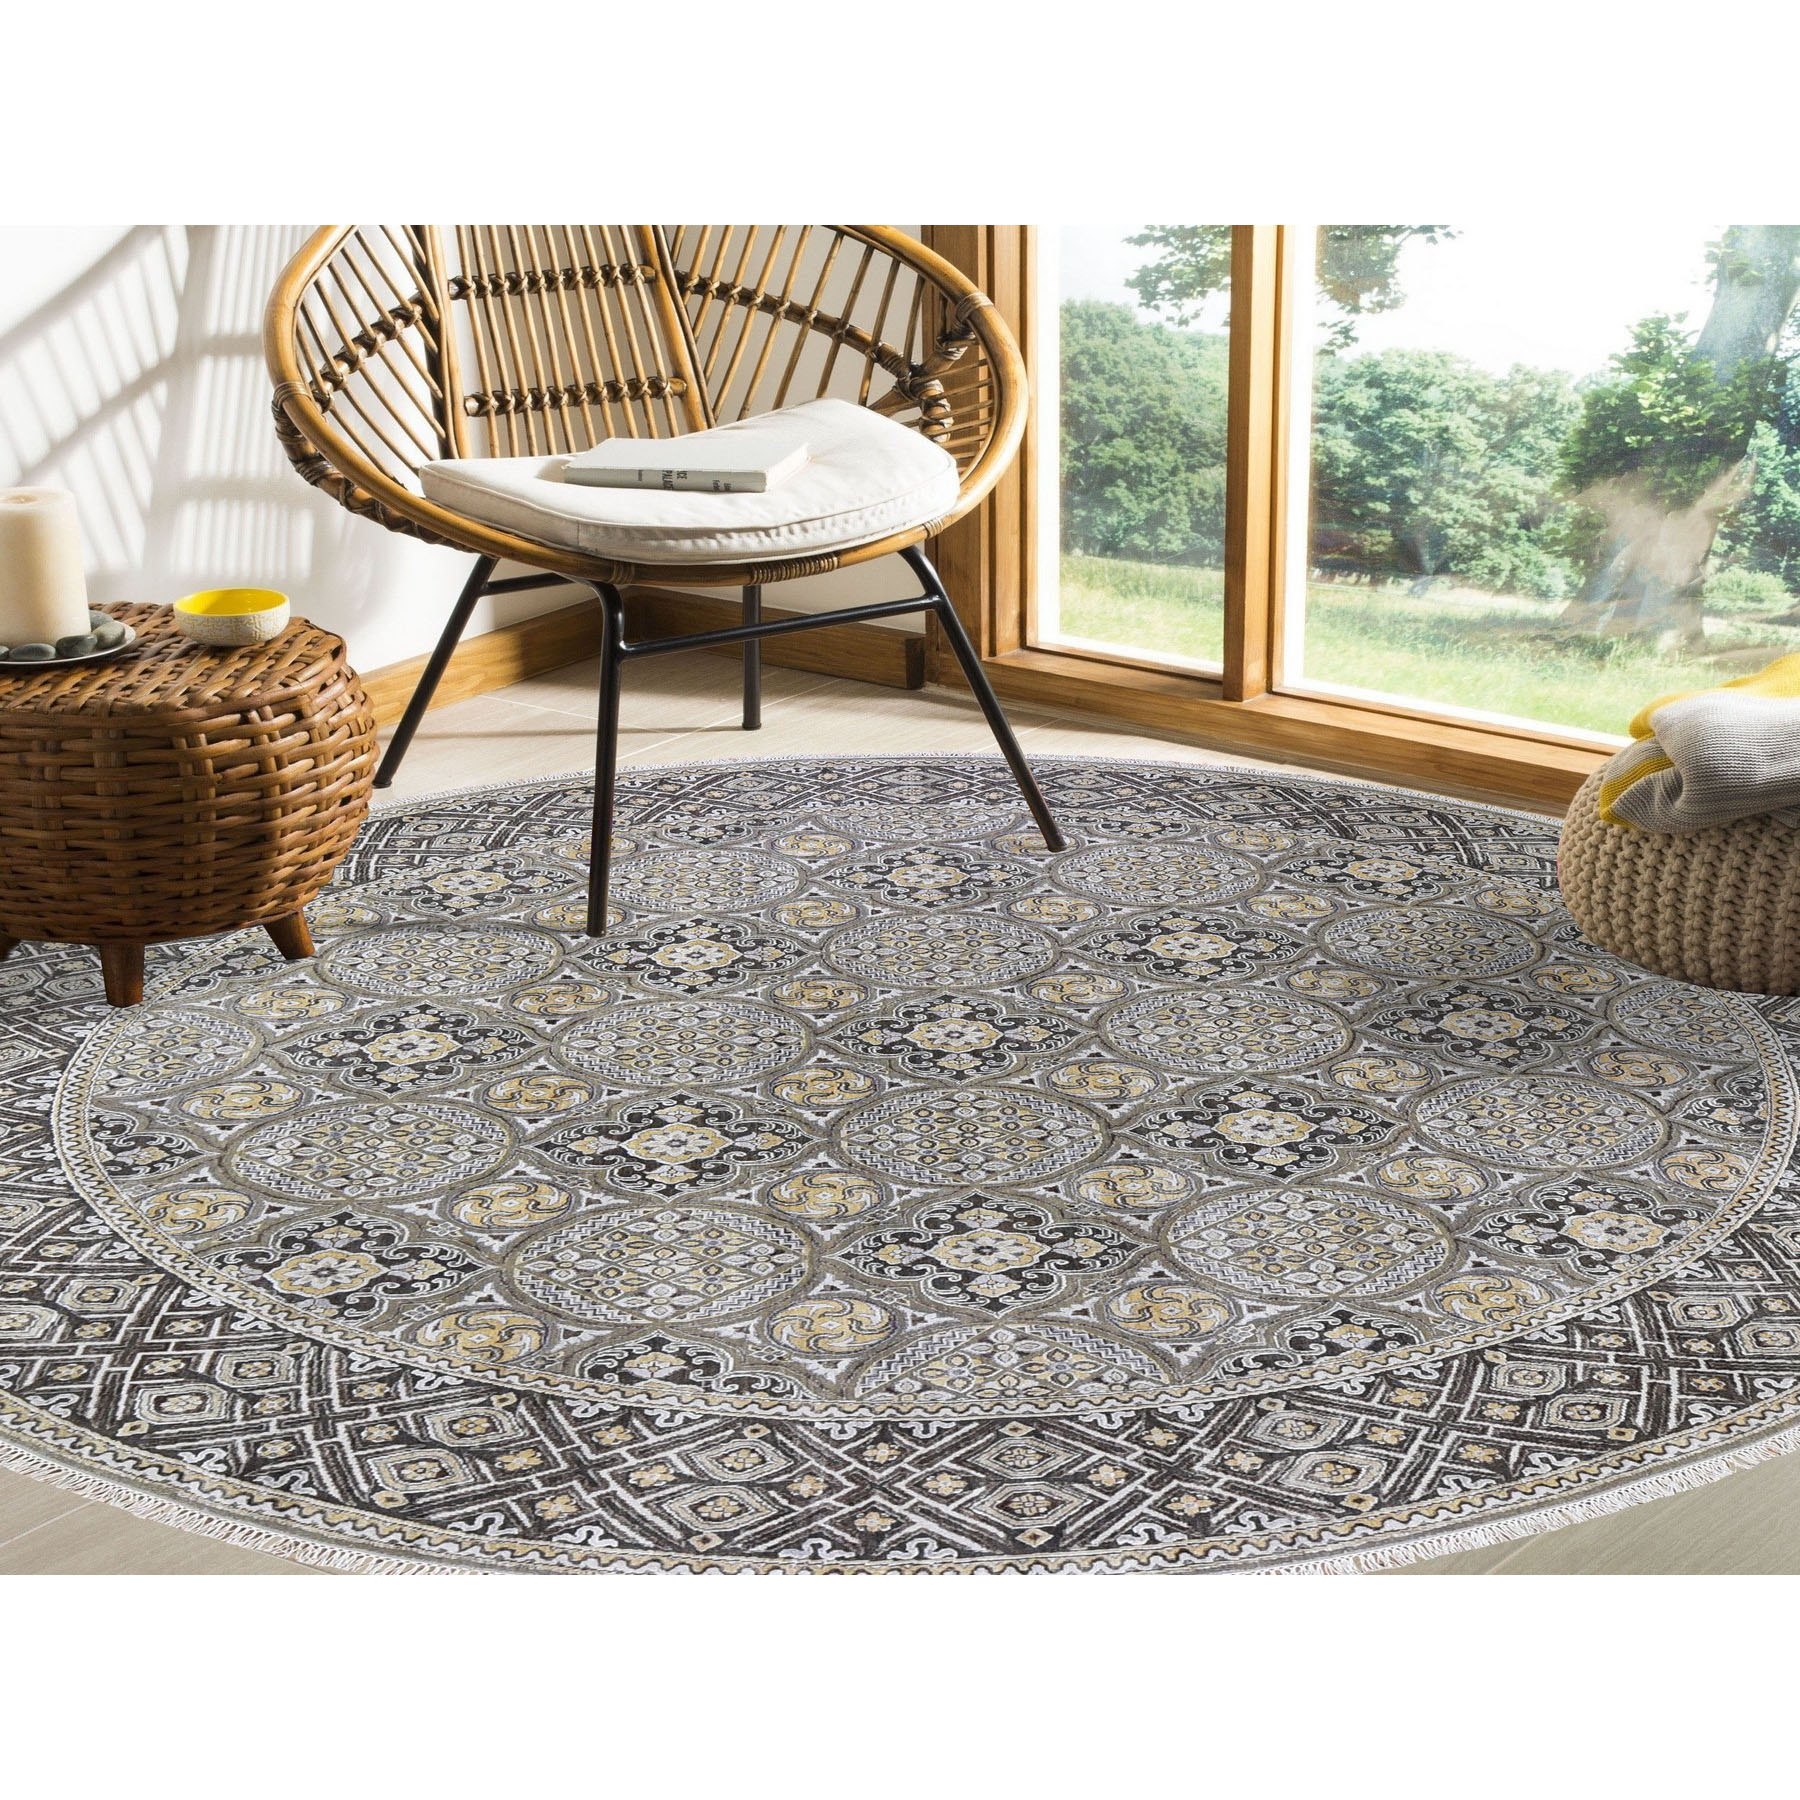 12-1 x12-5  Oversized Round Silk With Textured Wool Mughal Inspired Medallions Hand Knotted Oriental Rug 